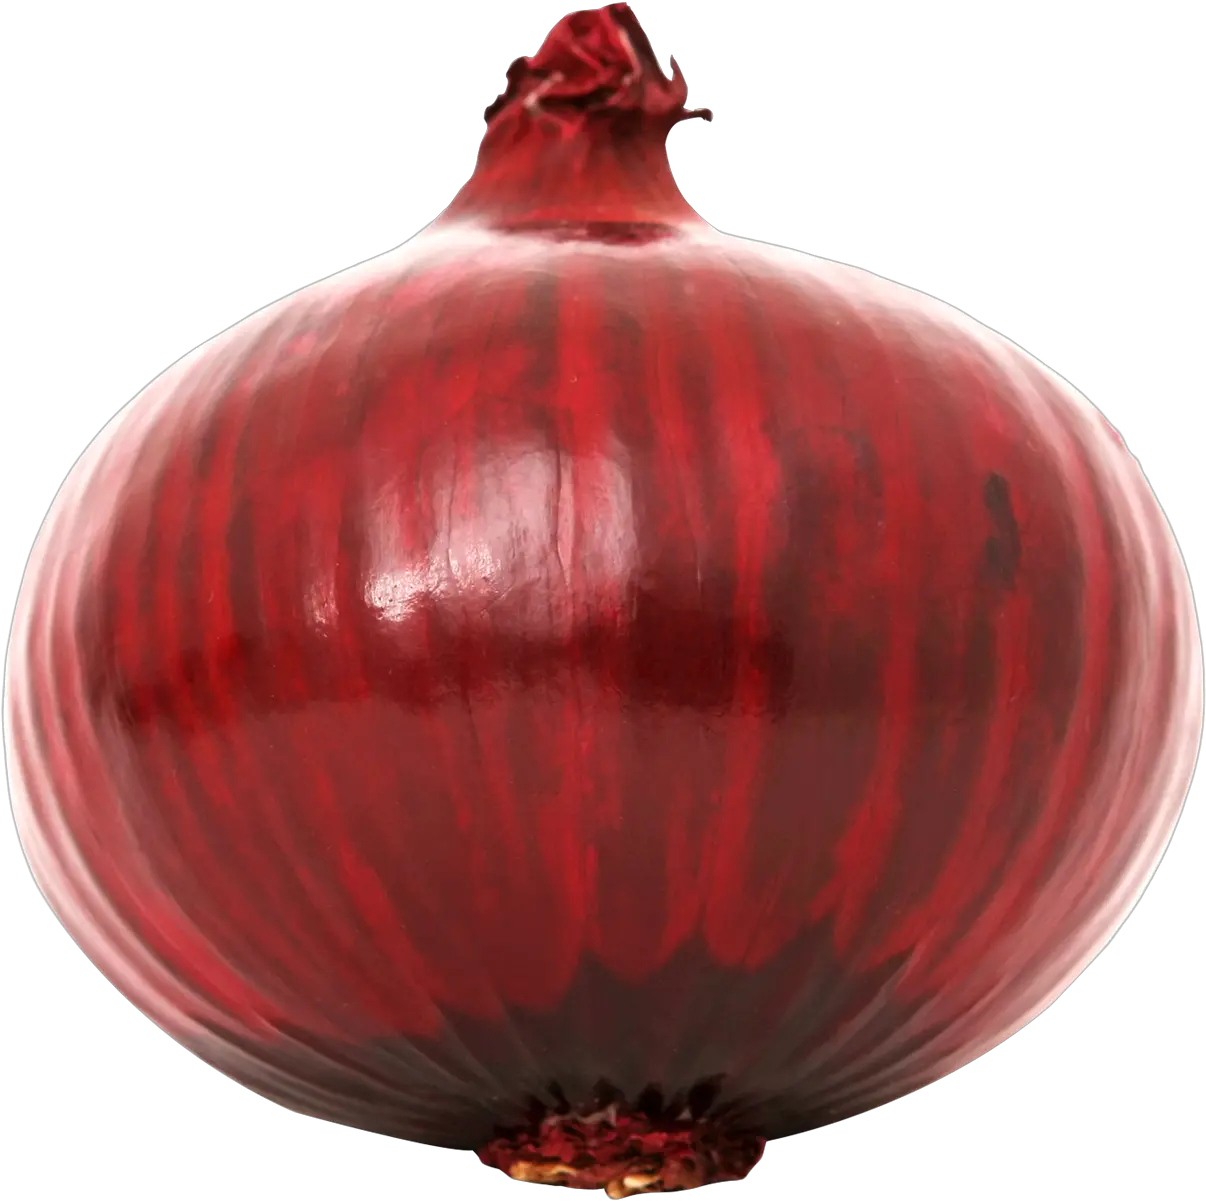 Red Onion Png Image Red Onion Transparent Onion Png